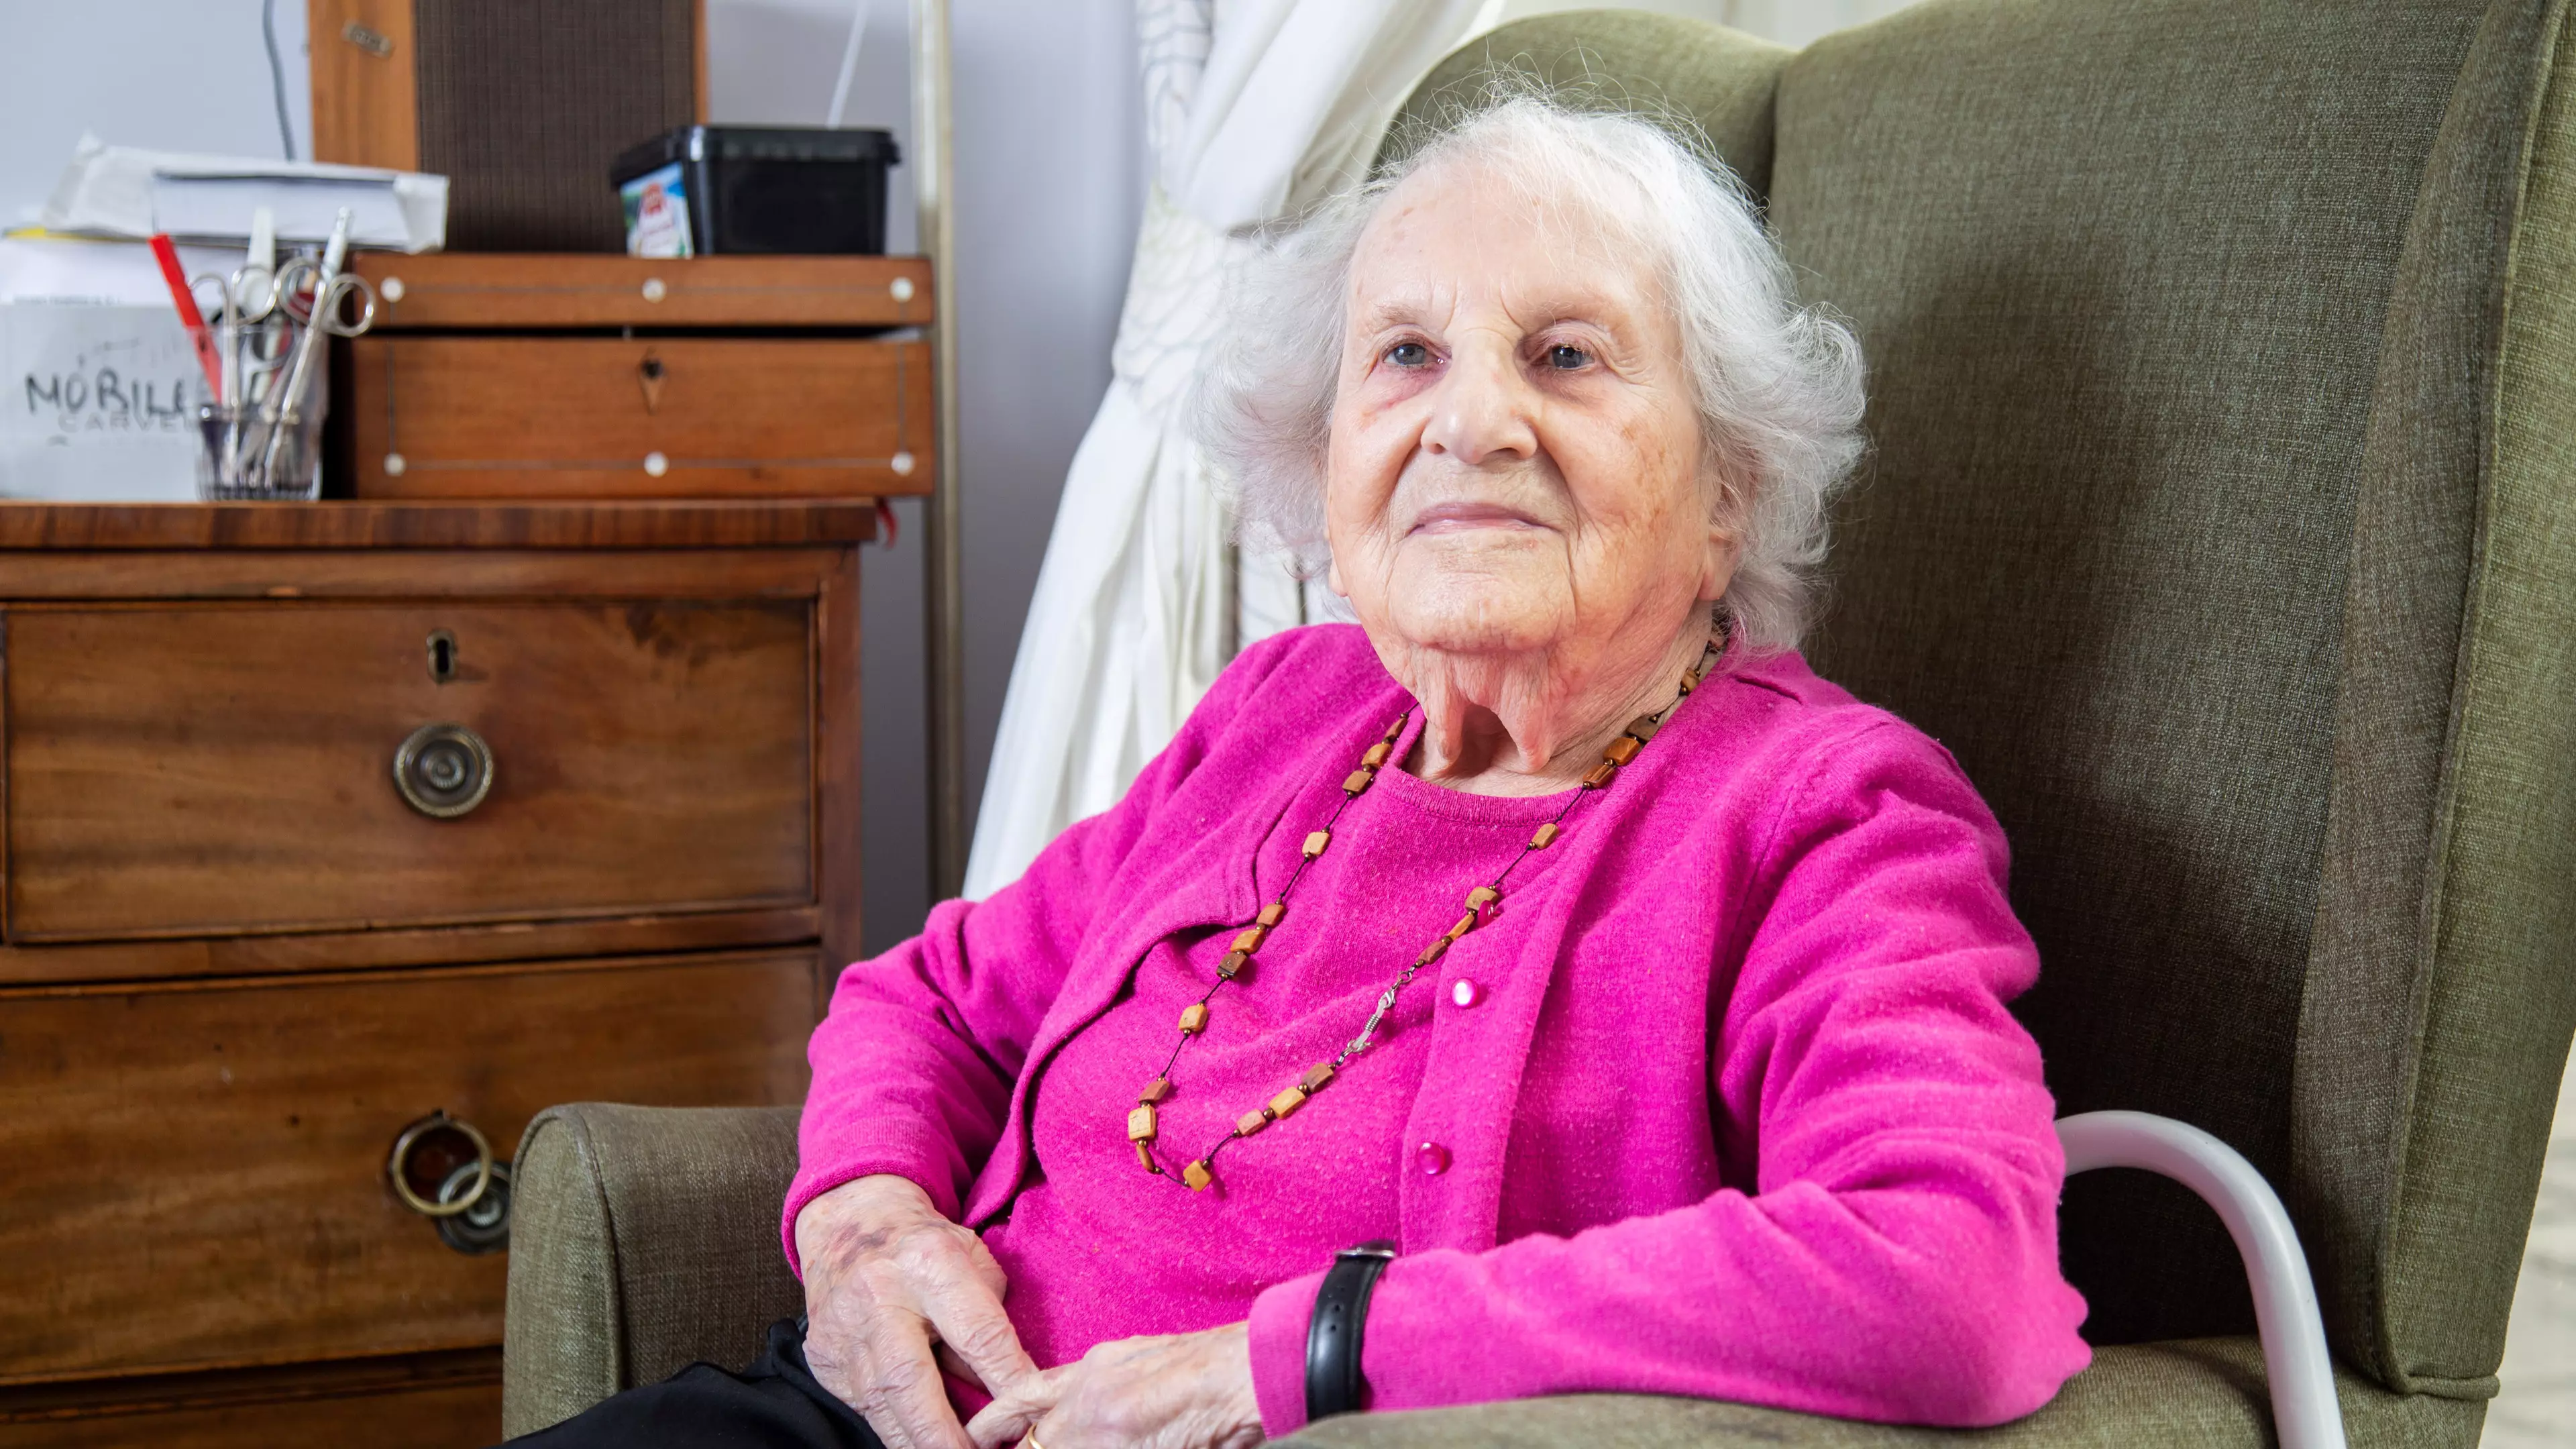 102-Year-Old Woman Reveals She Lived In The Same Building As Hitler